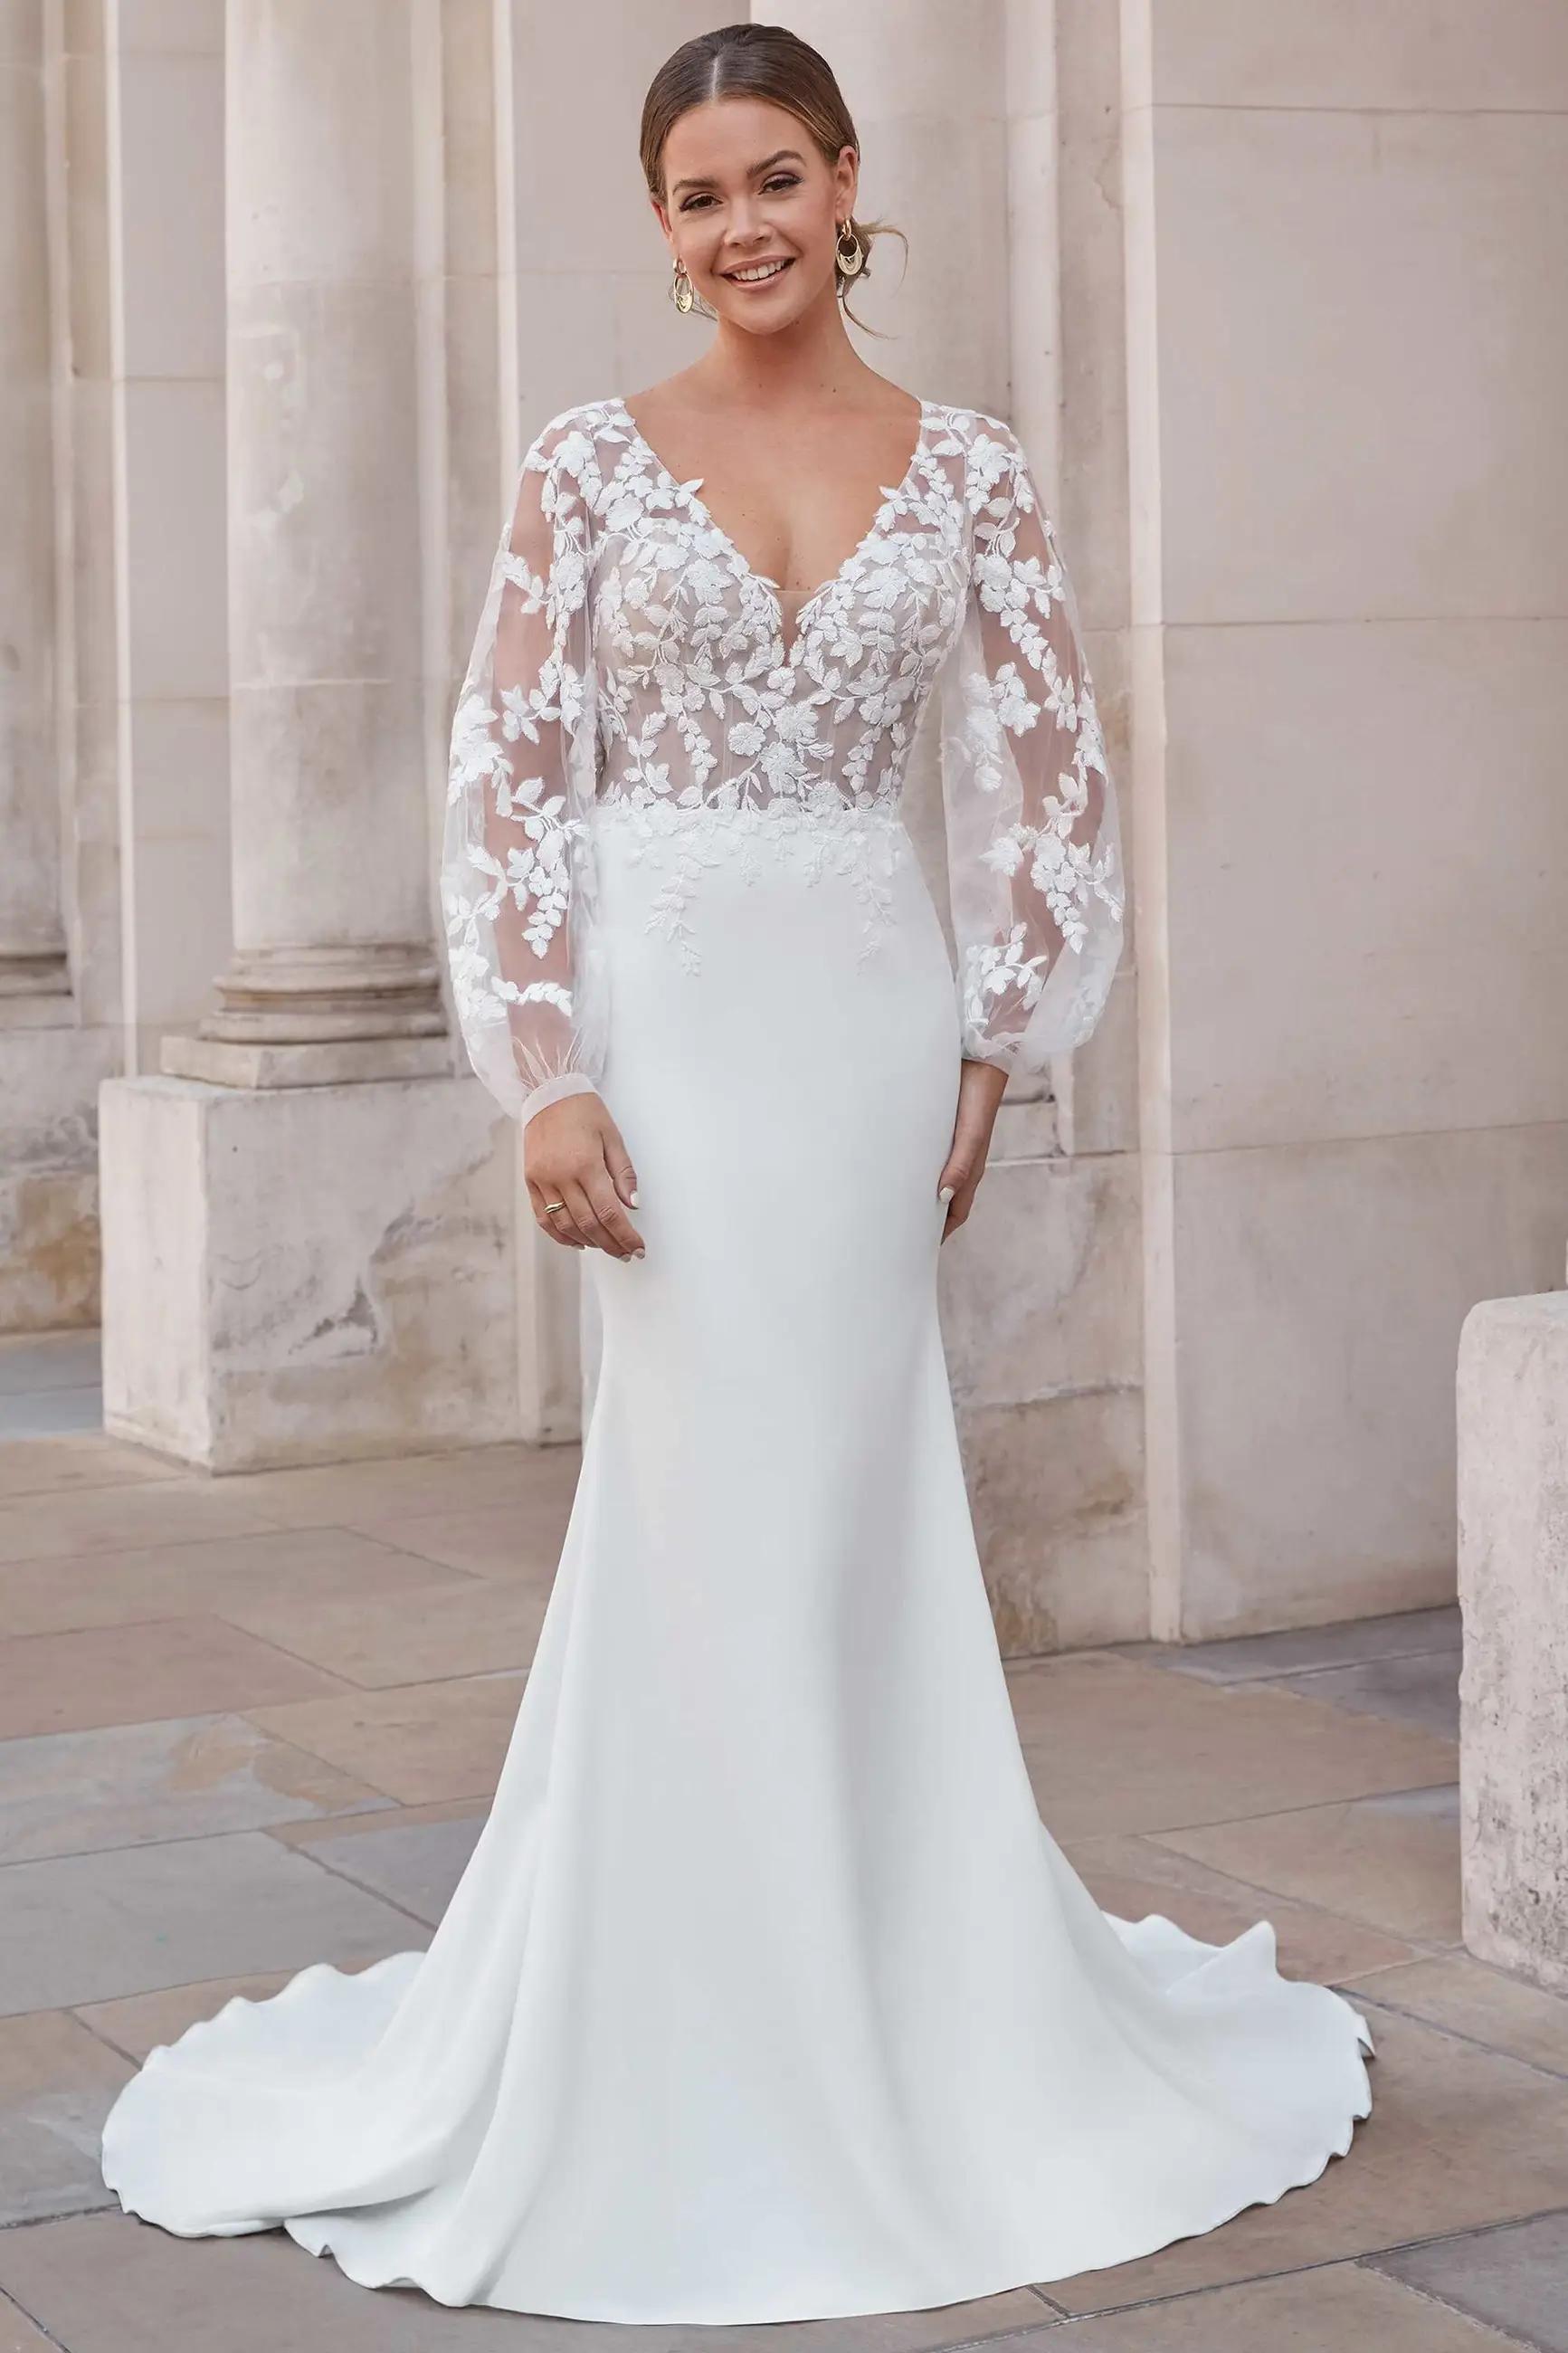 Finding the one:    A Guide to Choosing the Perfect Wedding Dress for Your Body Shape    Image